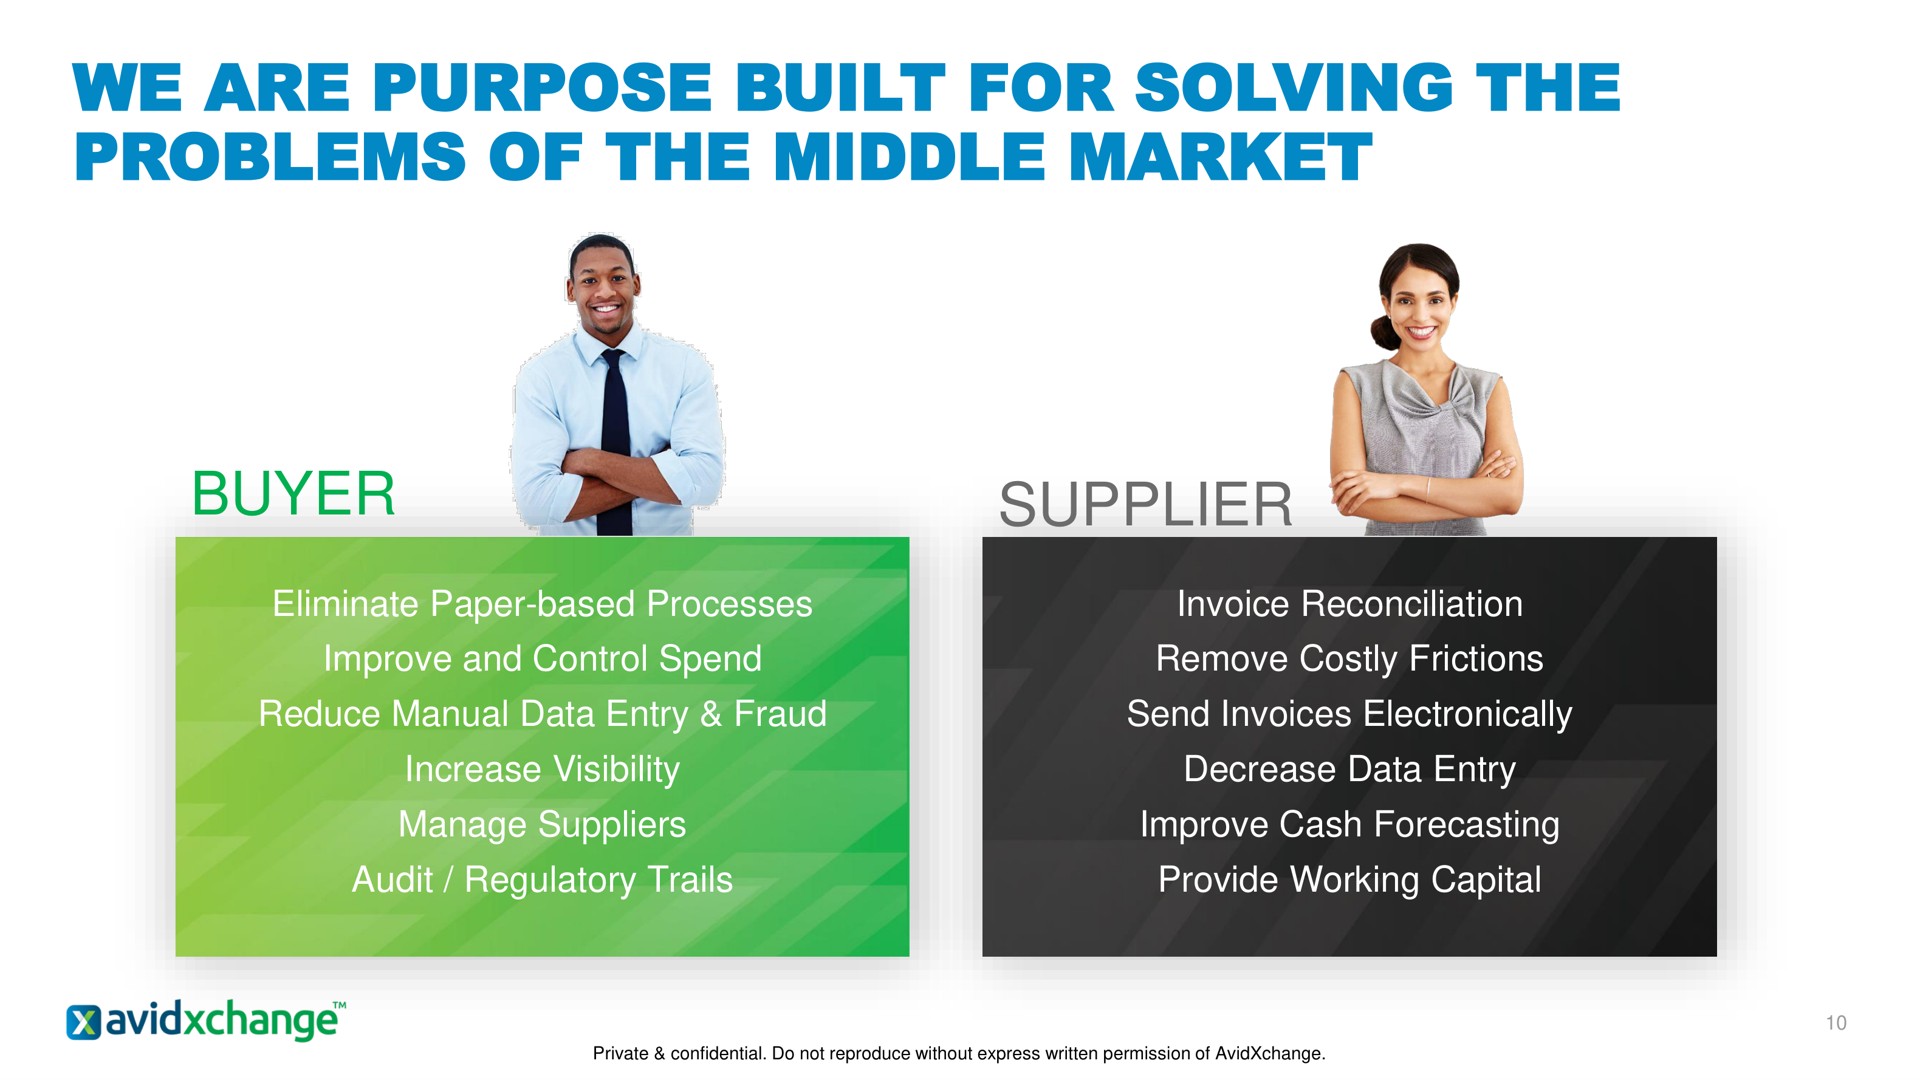 we are purpose built for solving the problems of the middle market | AvidXchange